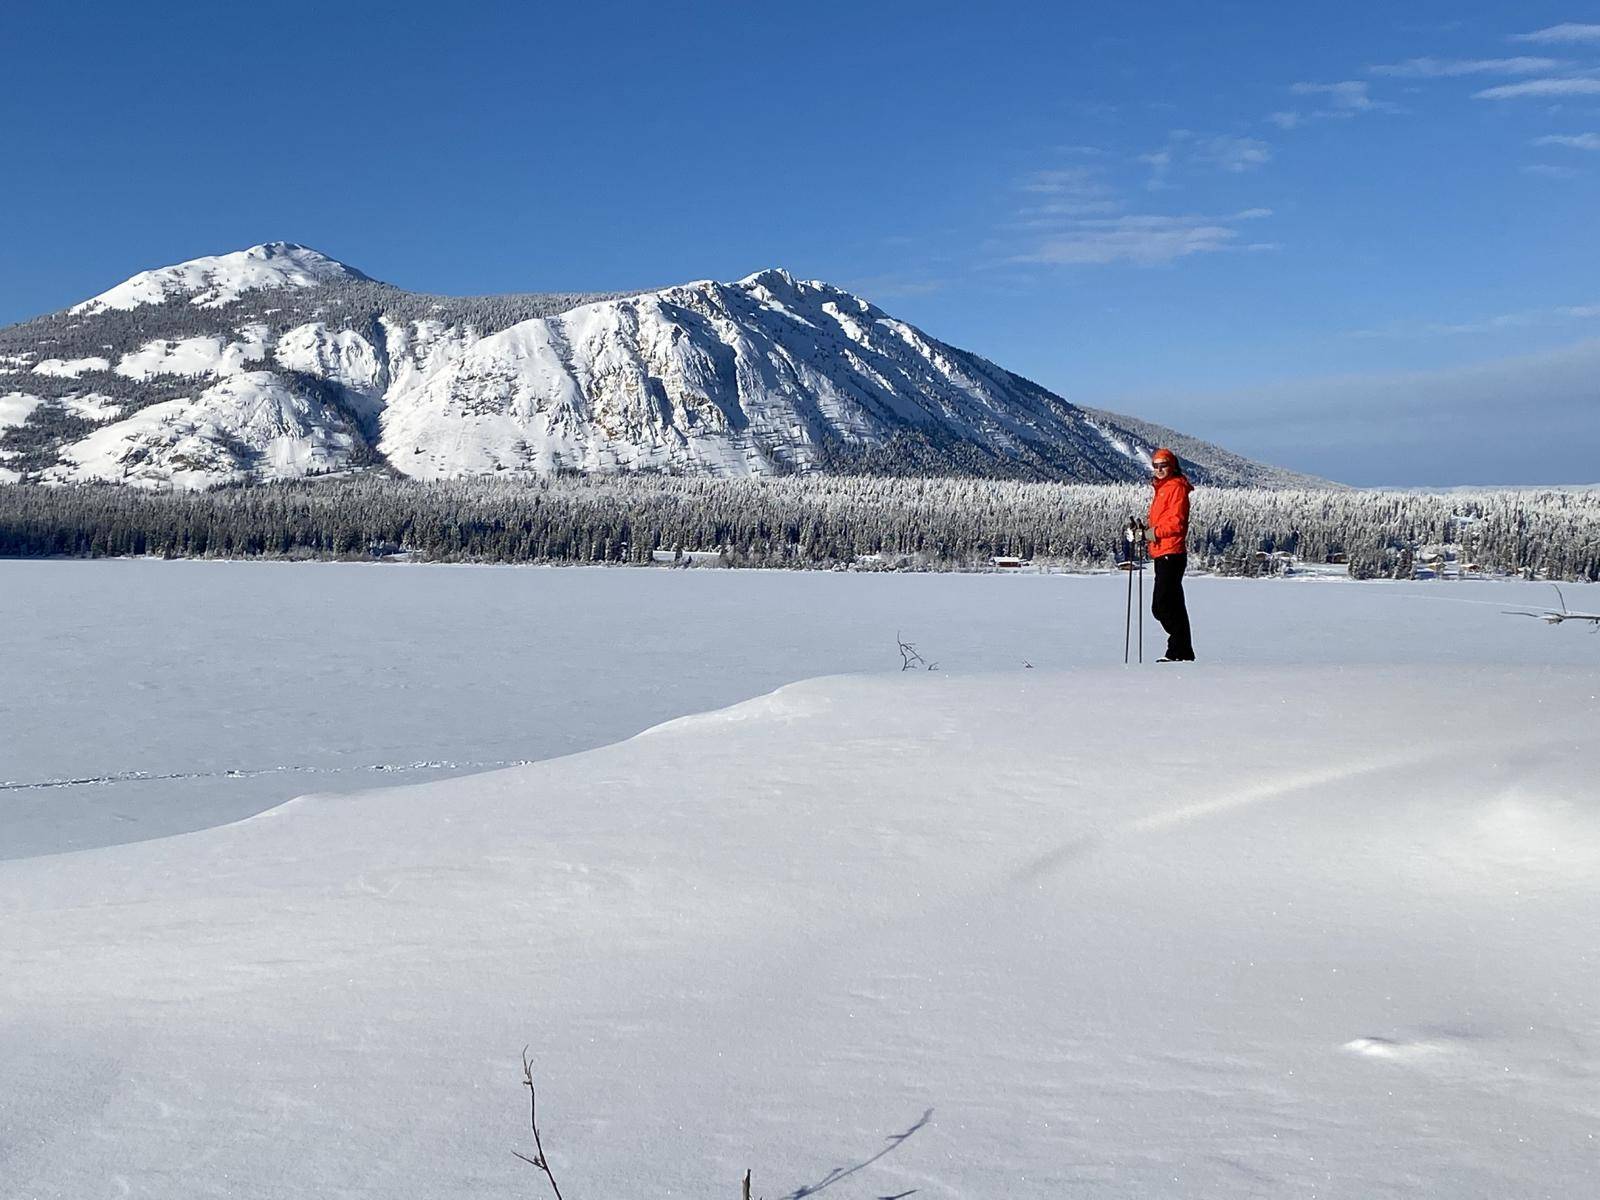 A woman on cross-country skis on the frozen tagish lake with large mountains in the background